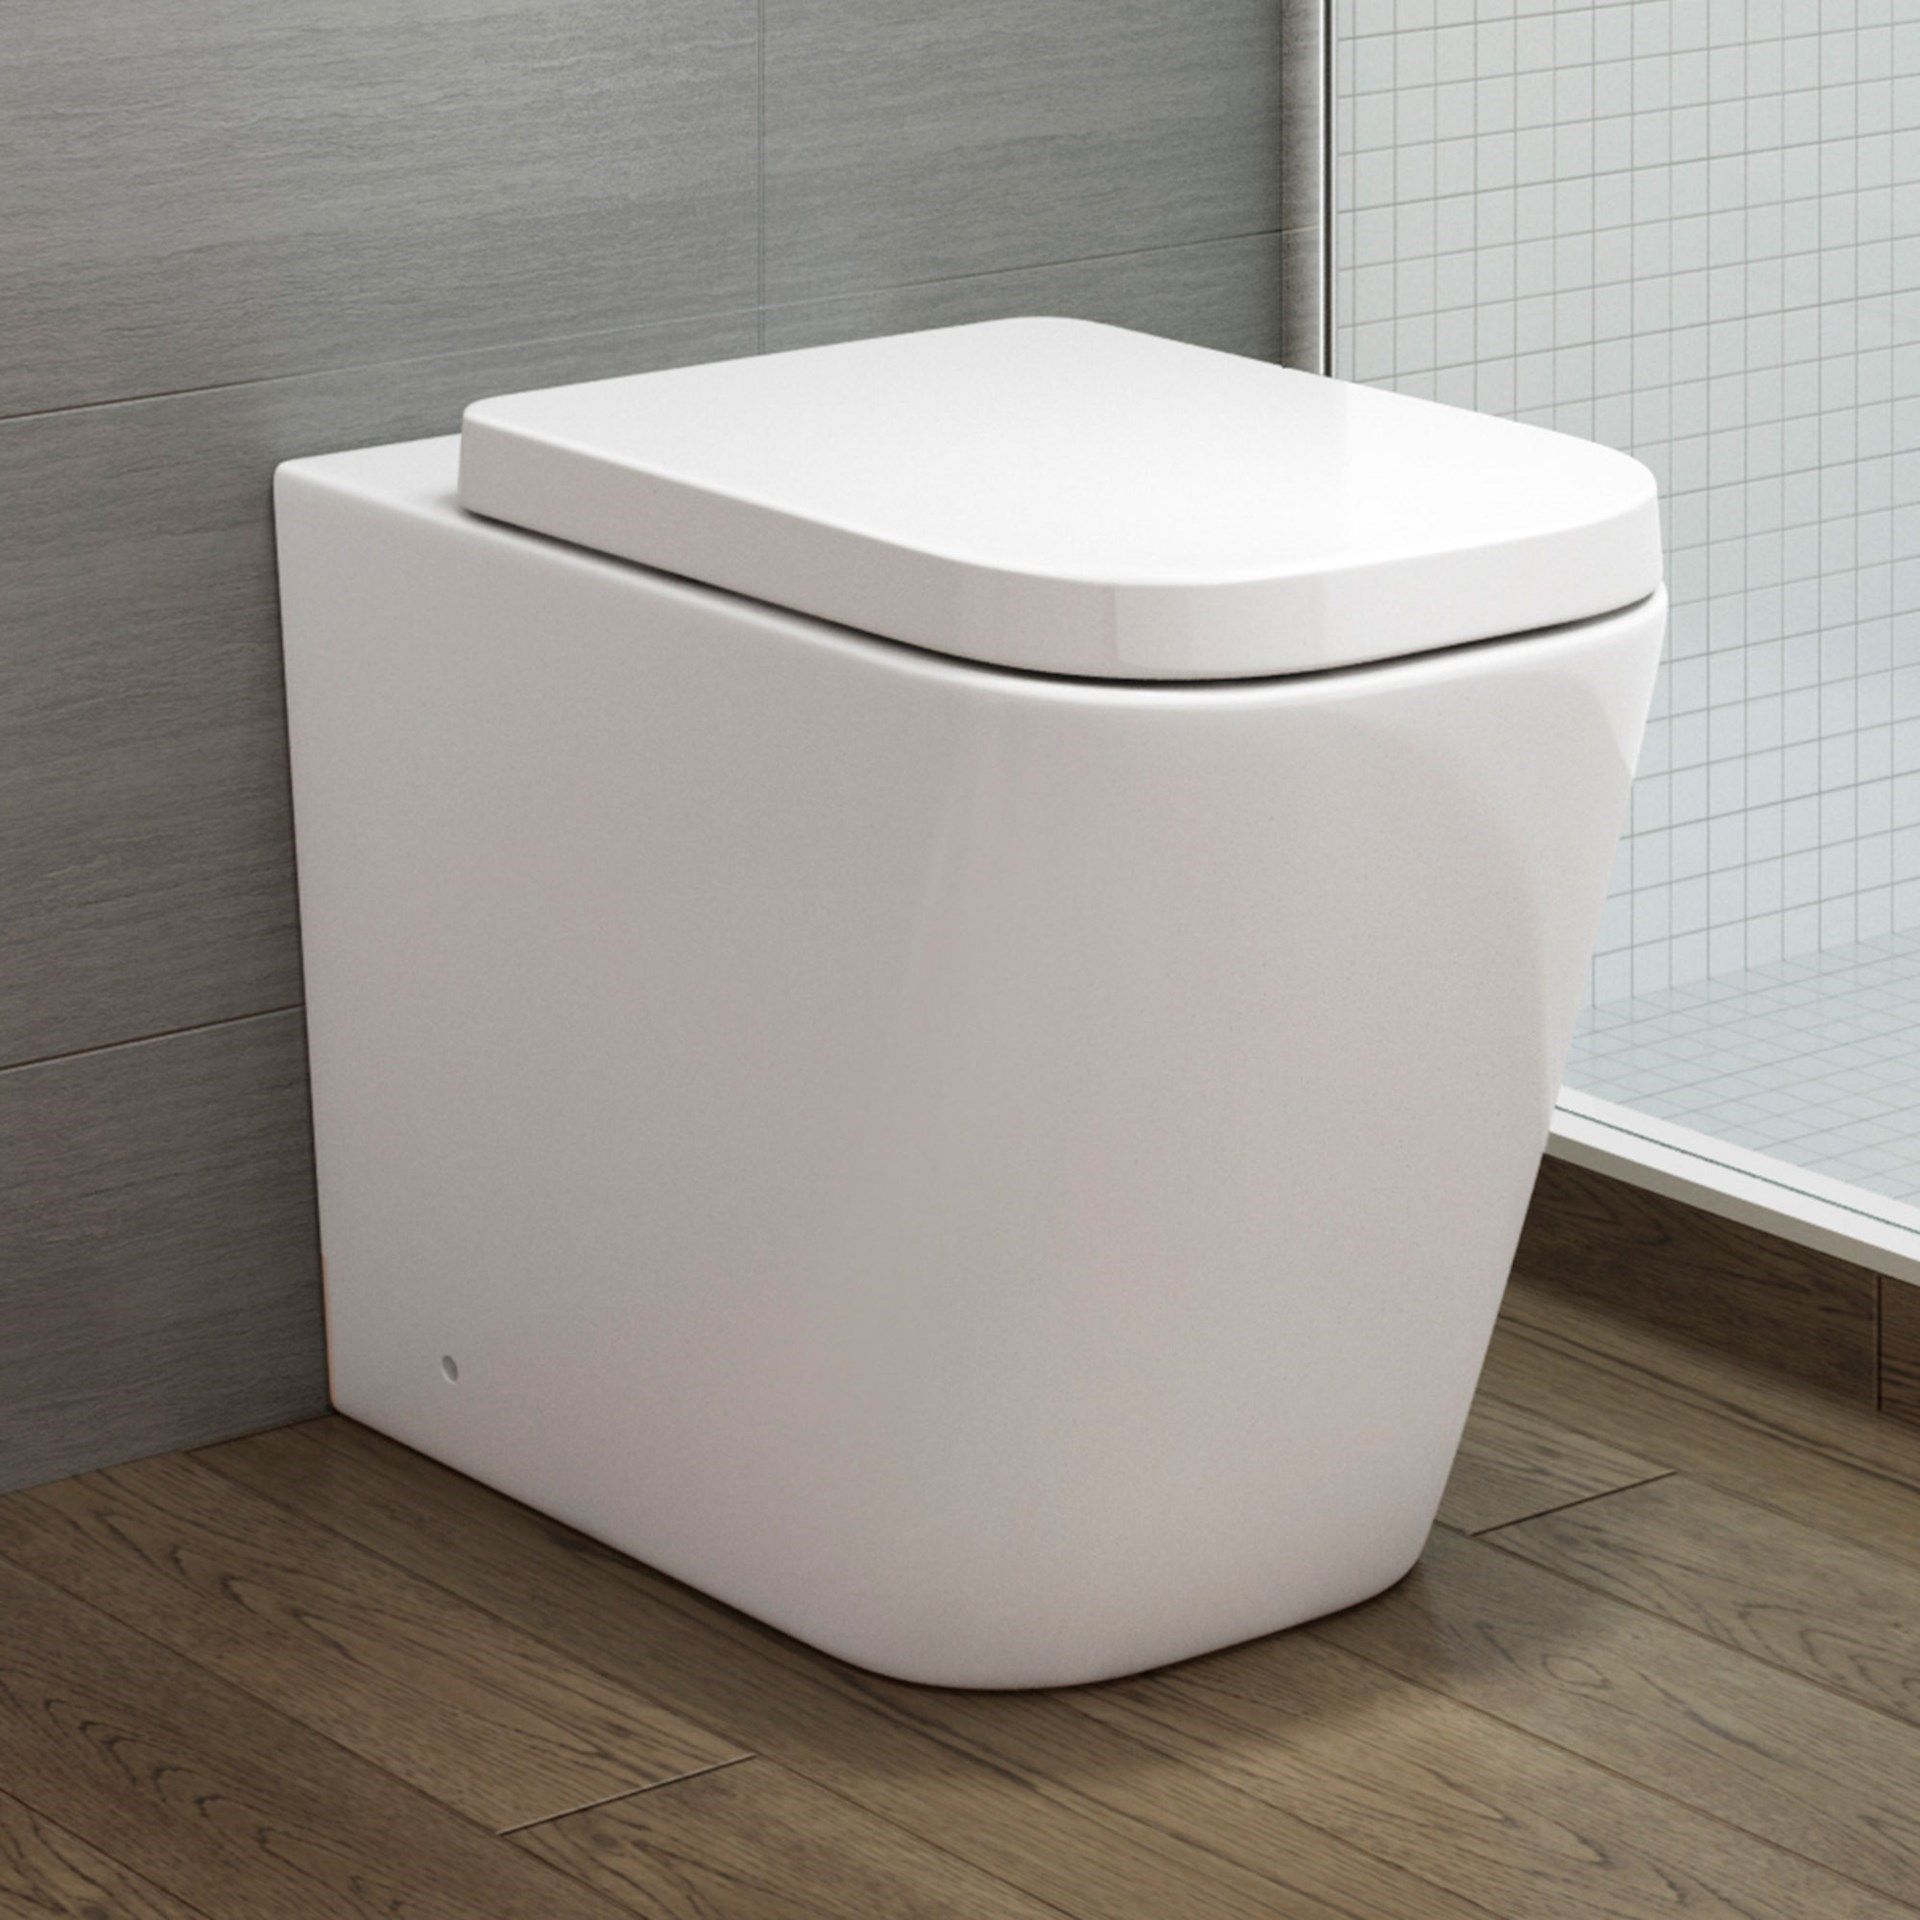 NEW & BOXED Florence Rimless Back to Wall Toilet inc Luxury Soft Close Seat.RRP £349.99 each.R... - Image 3 of 3